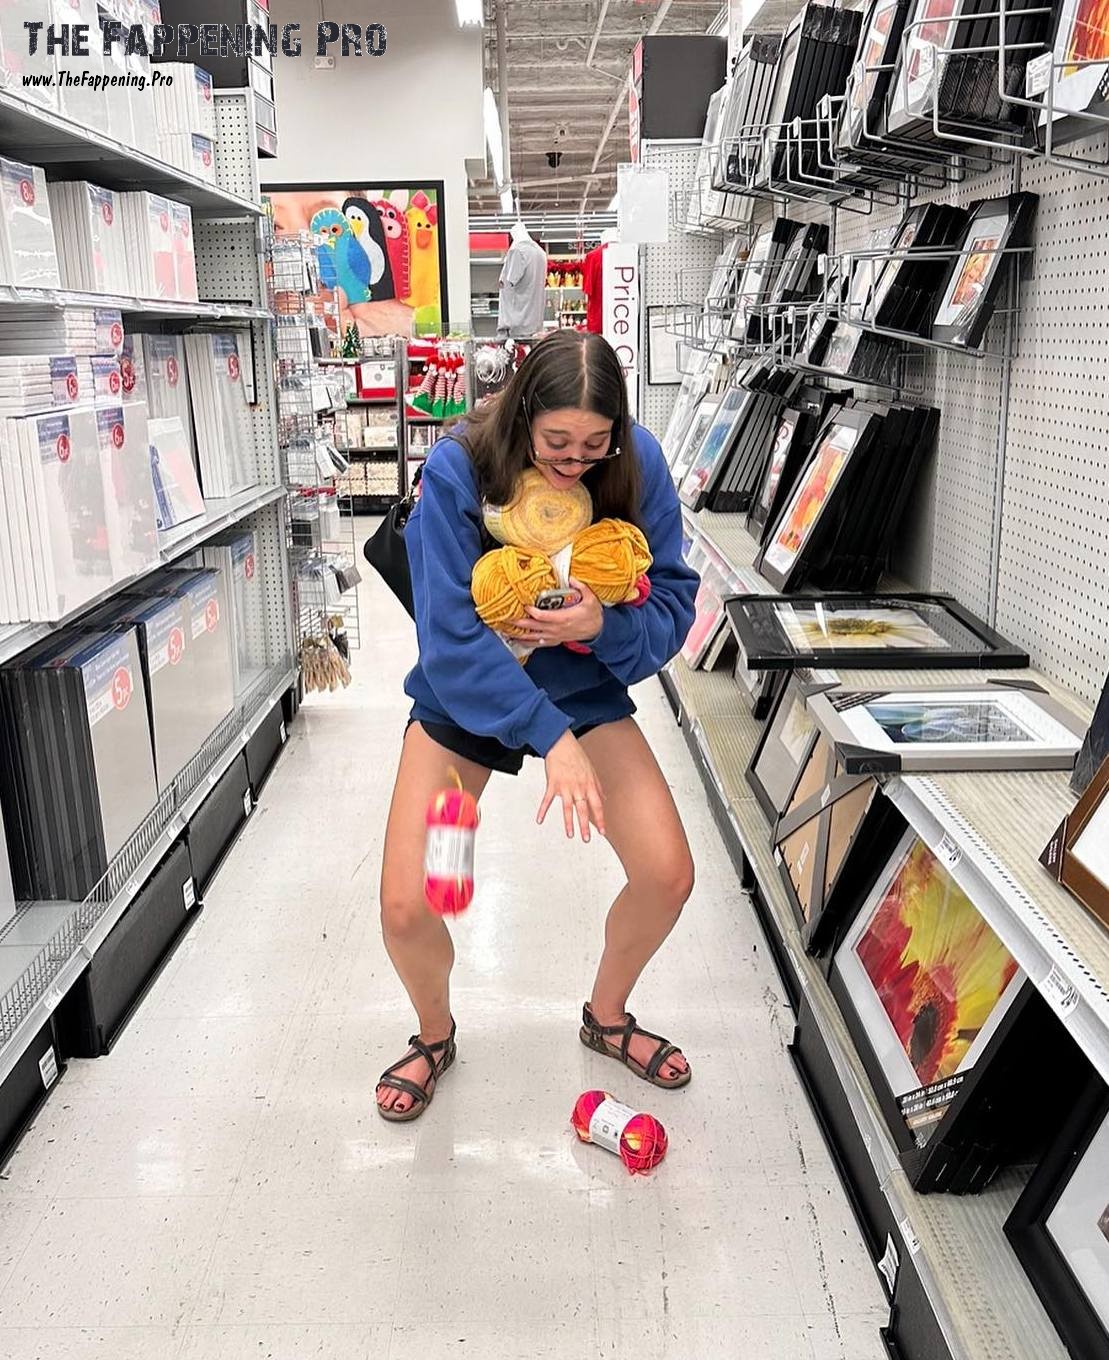 Get ready to laugh and be amazed as dancer Kira Kosarin takes a trip to the store, only to end up dropping her items on the floor in a hilarious mishap. But it's not just the funny moment that's capturing attention - it's also her stunning legs in short shorts that are stealing the show. At 26 years old, Kira Kosarin continues to flaunt her toned and athletic legs, proving that she's always ready to turn heads wherever she goes!